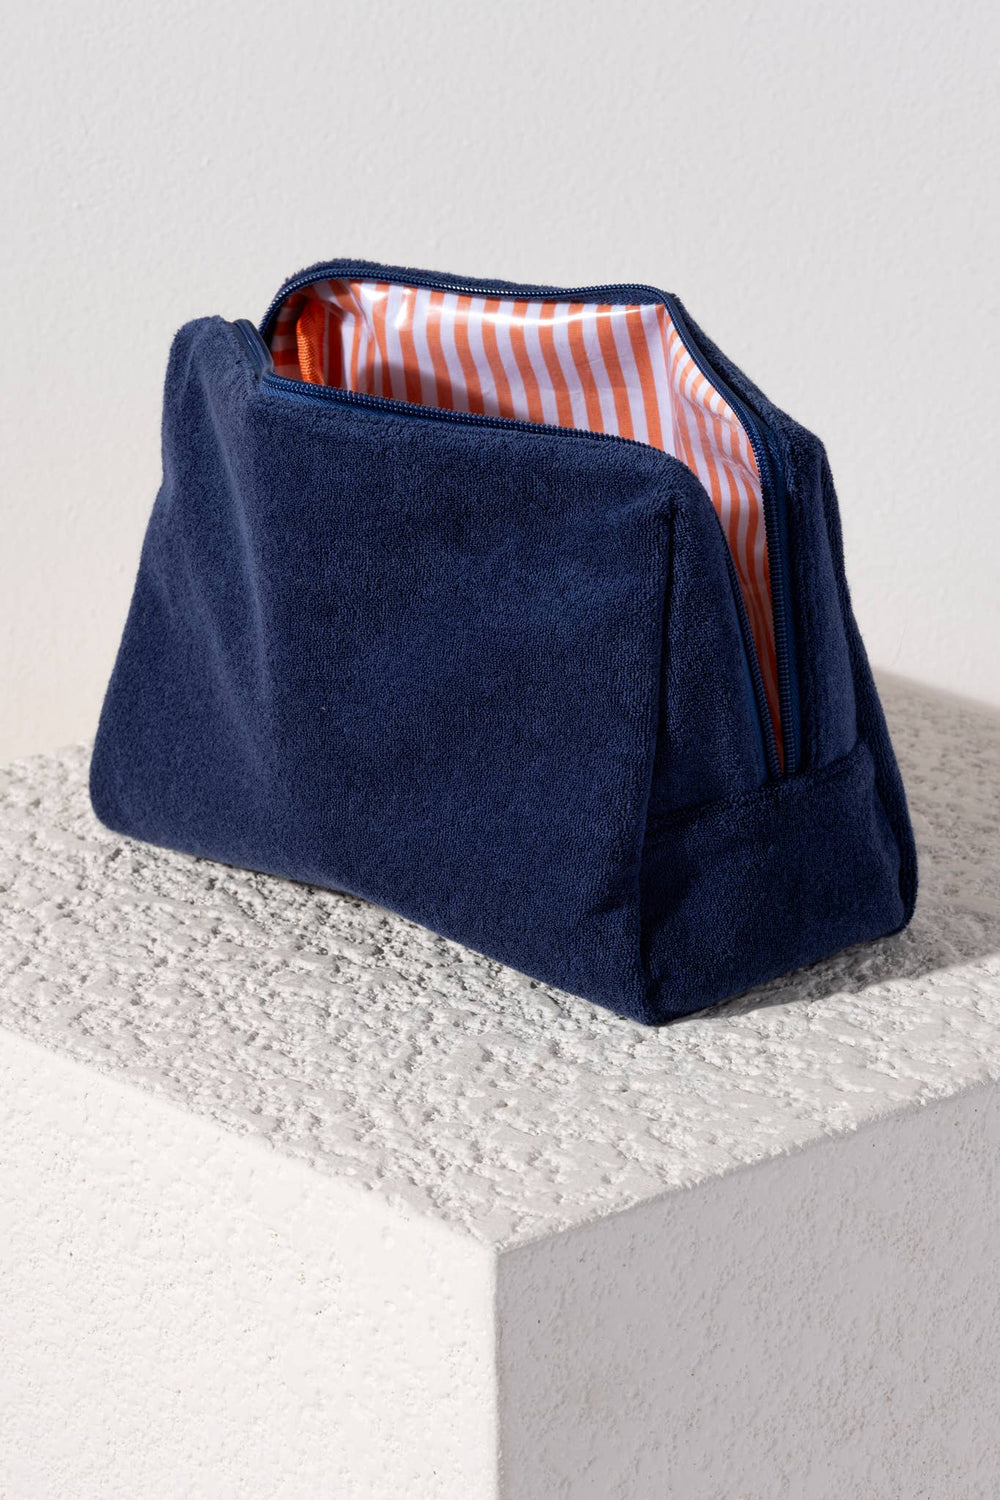 Sol Zip Pouch: Navy - Bloom and Petal